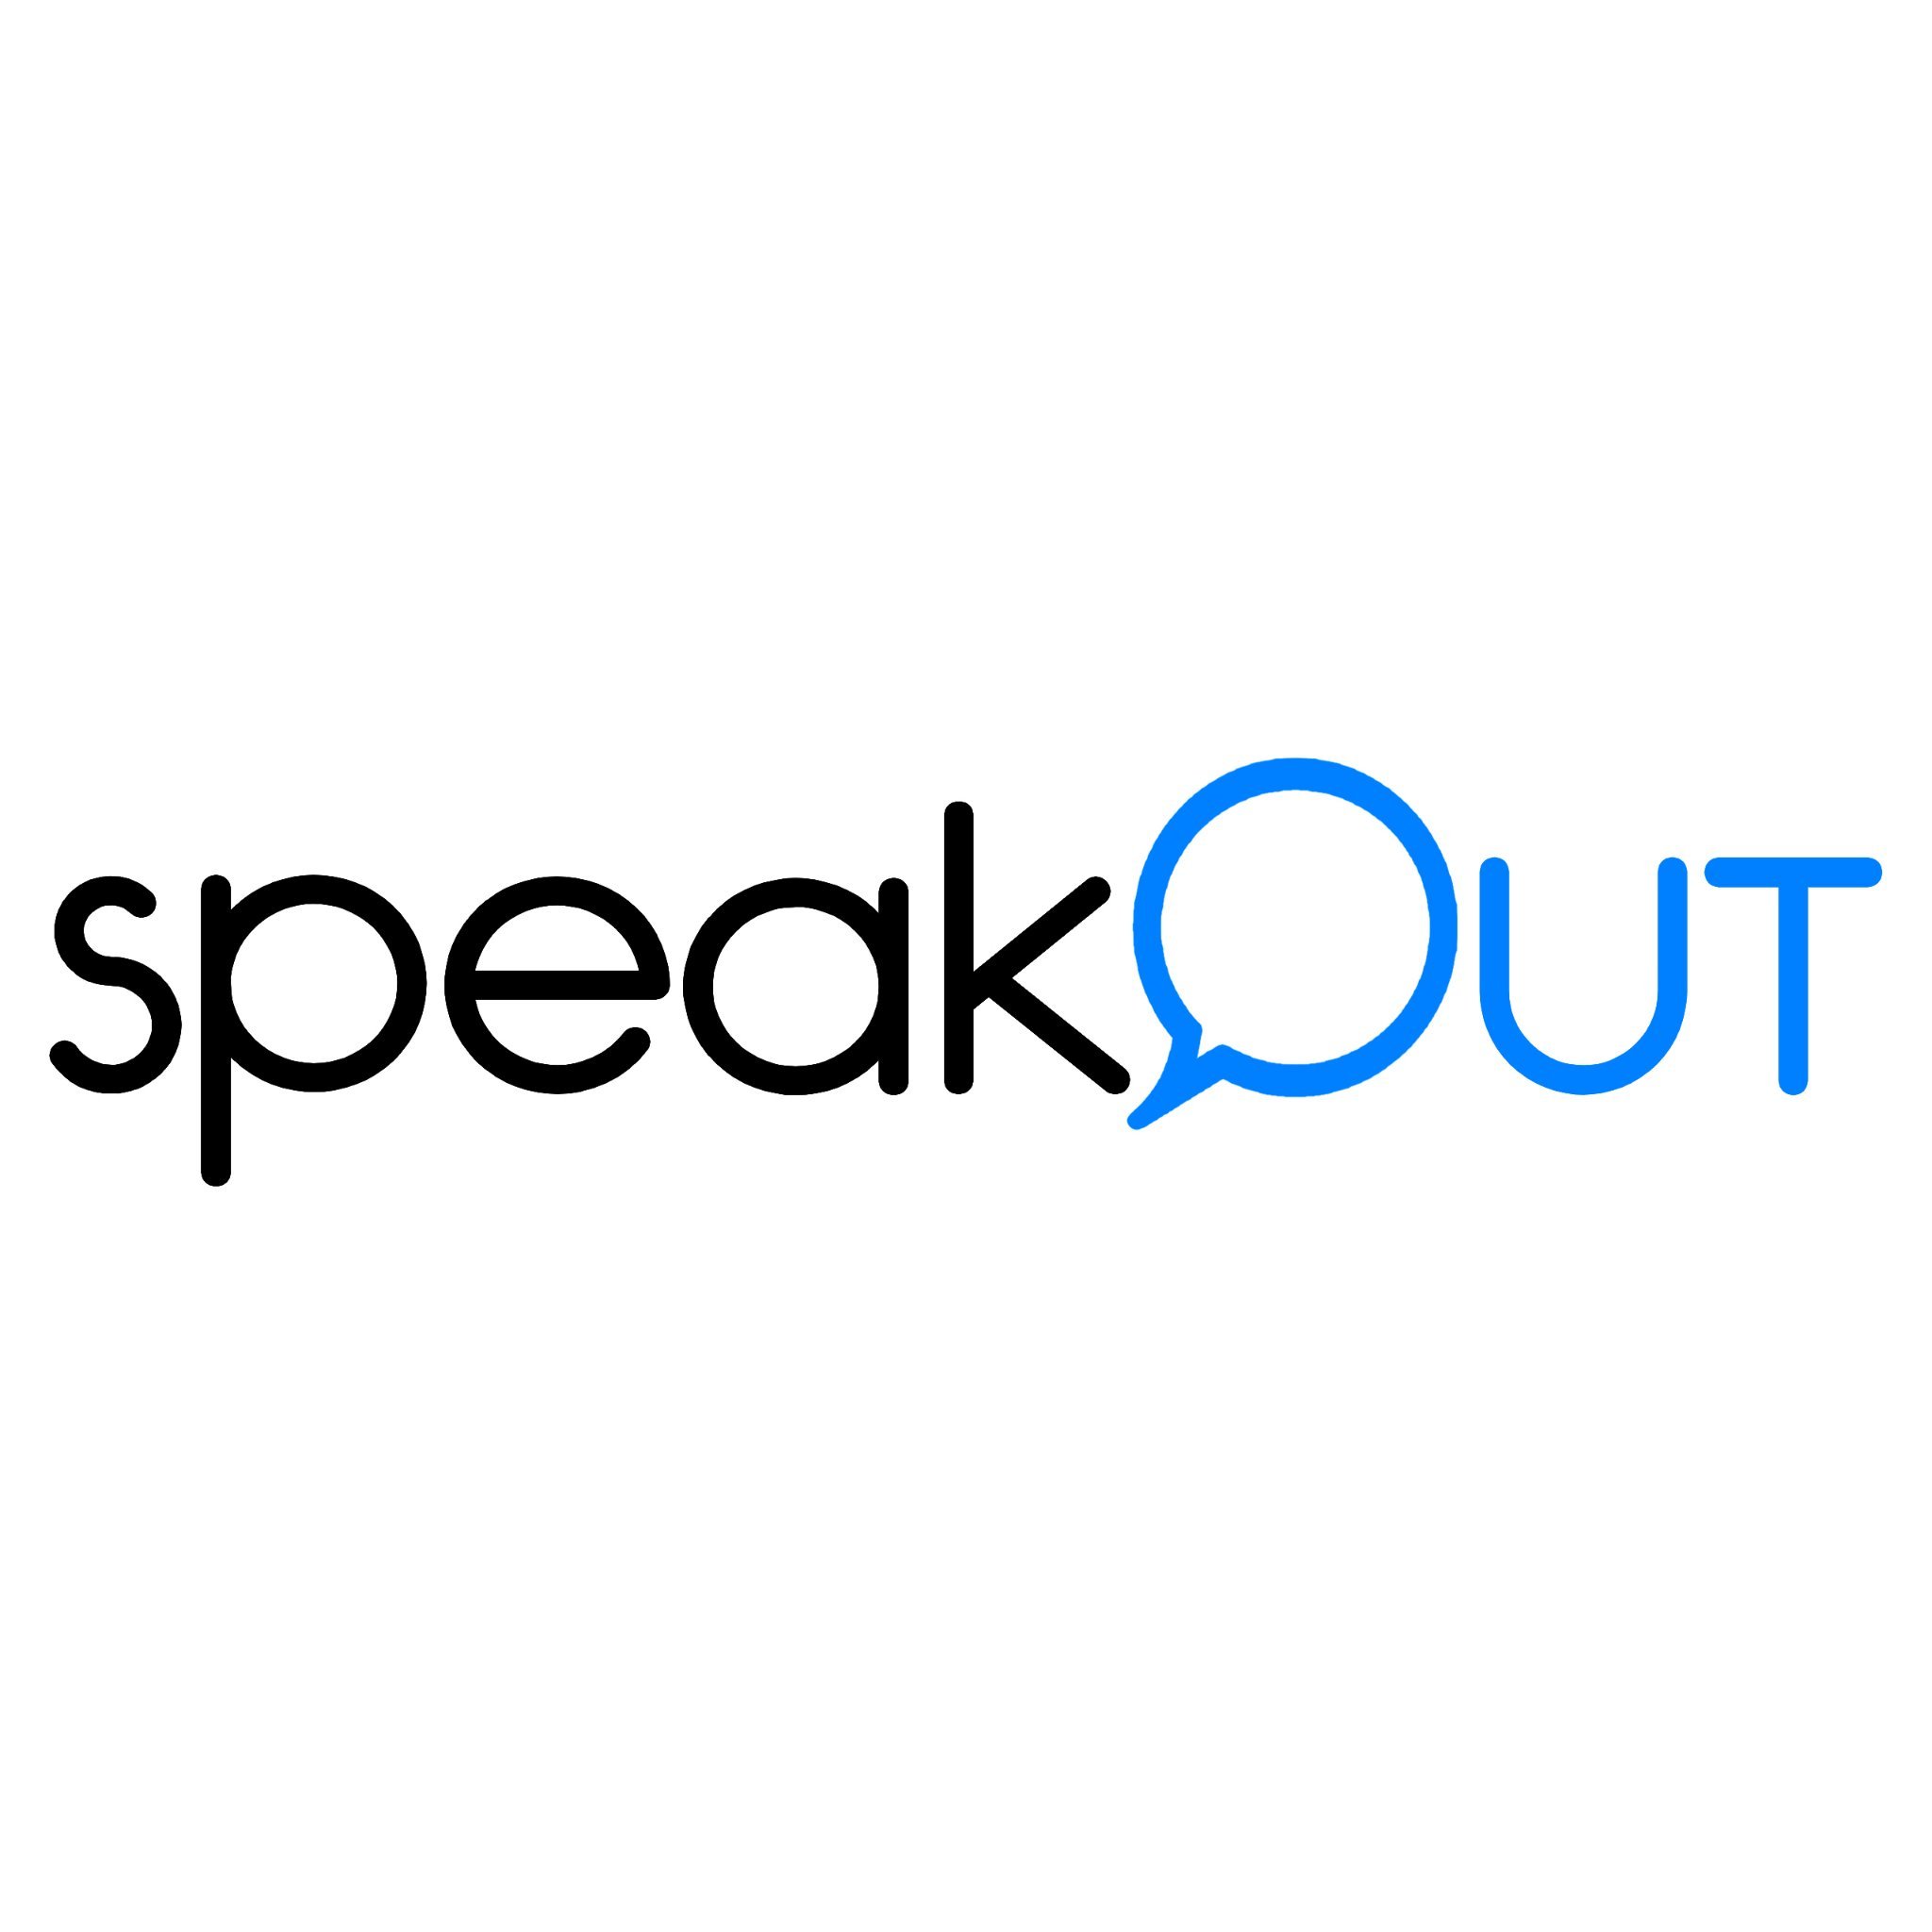 Suni Media Production presents speak OUT

 |  Docu-series and fundraising event

|  Raising awareness about mental health in the sports world